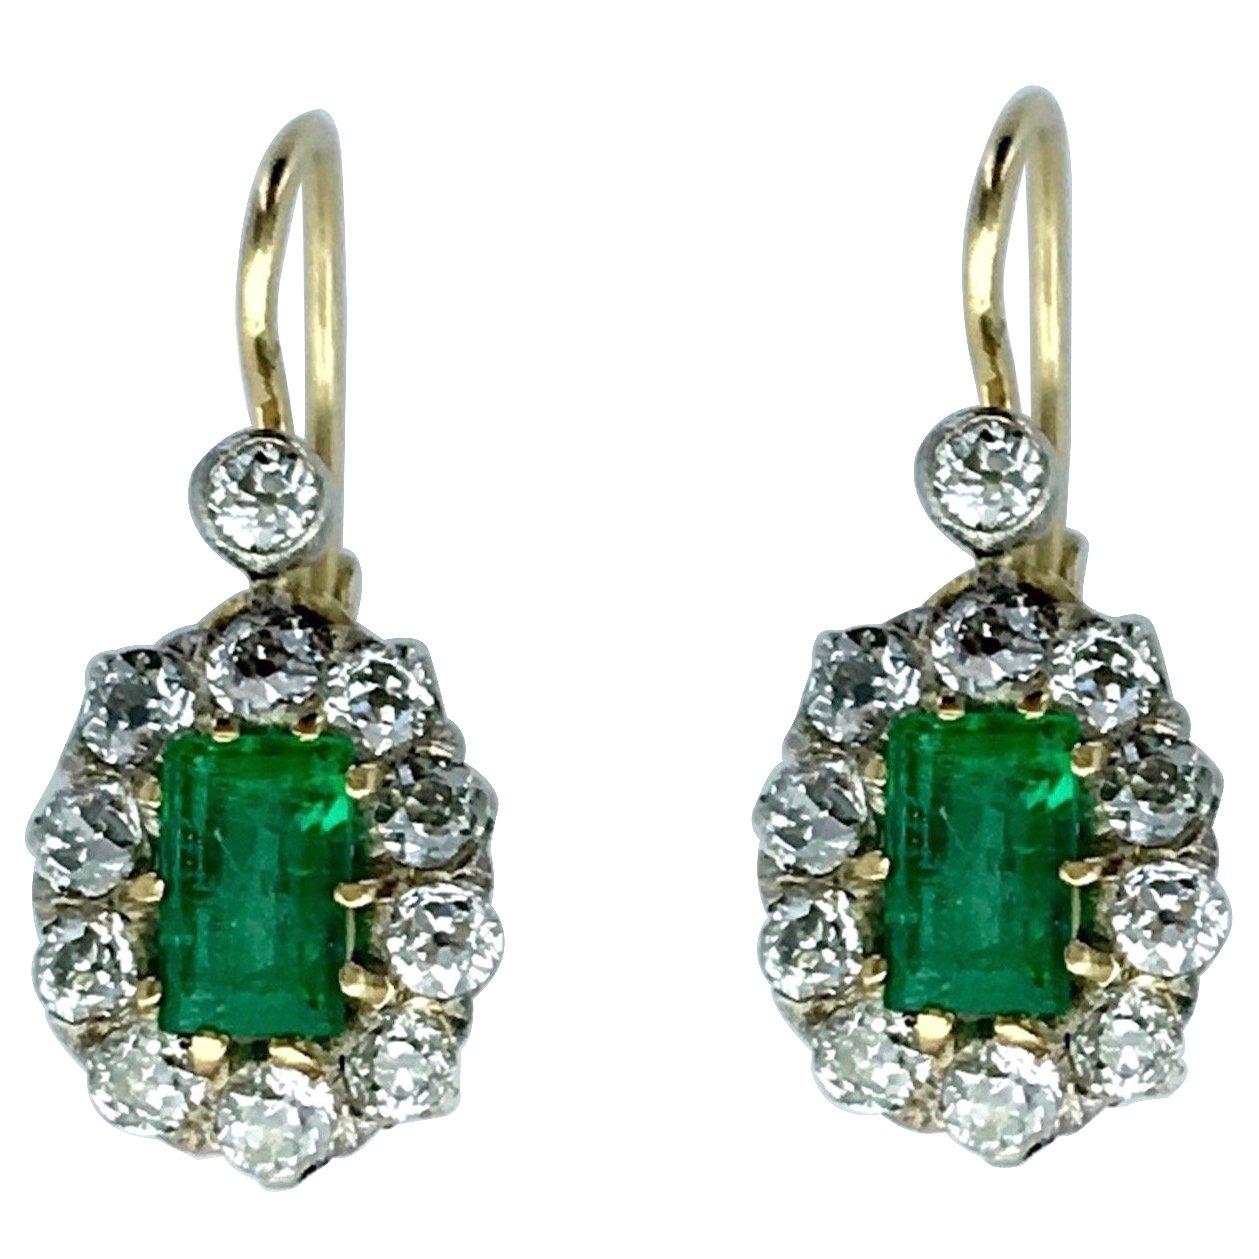 Nothing more adorable than Dormeuses Earrings.
Emeralds surrounded by Old-mine cut Diamond on Silver 800 top and Gold 585 14k.
Circa 1910.

Gross weight: 4.50 grams.